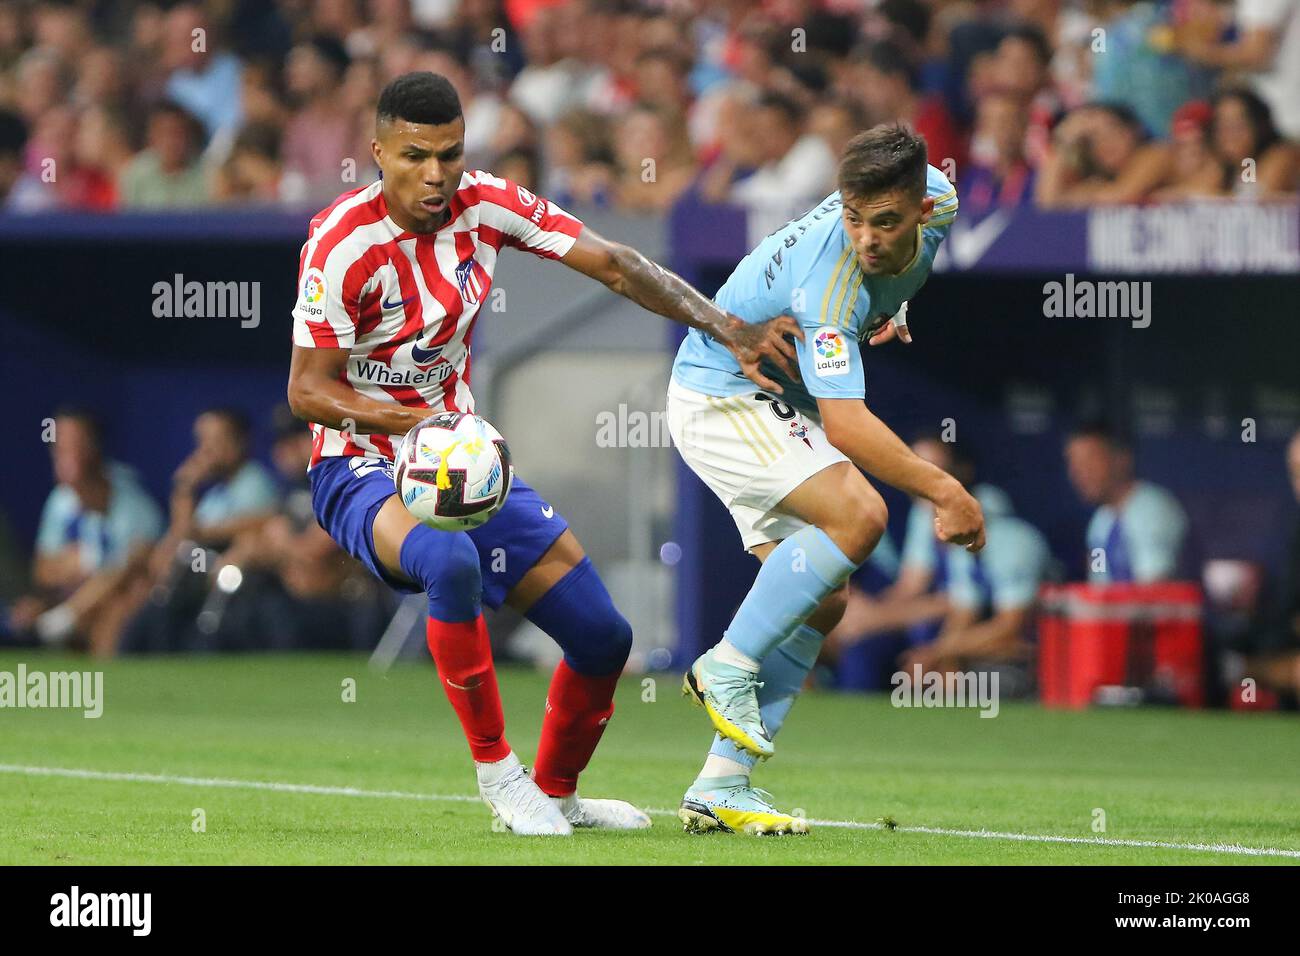 Madrid, Spain. 10th Sep, 2022. Atletico´s Reinildo in action during La Liga match day 5 between Atletico de Madrid and Celta at Civitas Metropolitano Stadium in Madrid, Spain, on September 10, 2022. Credit: Edward F. Peters/Alamy Live News Stock Photo